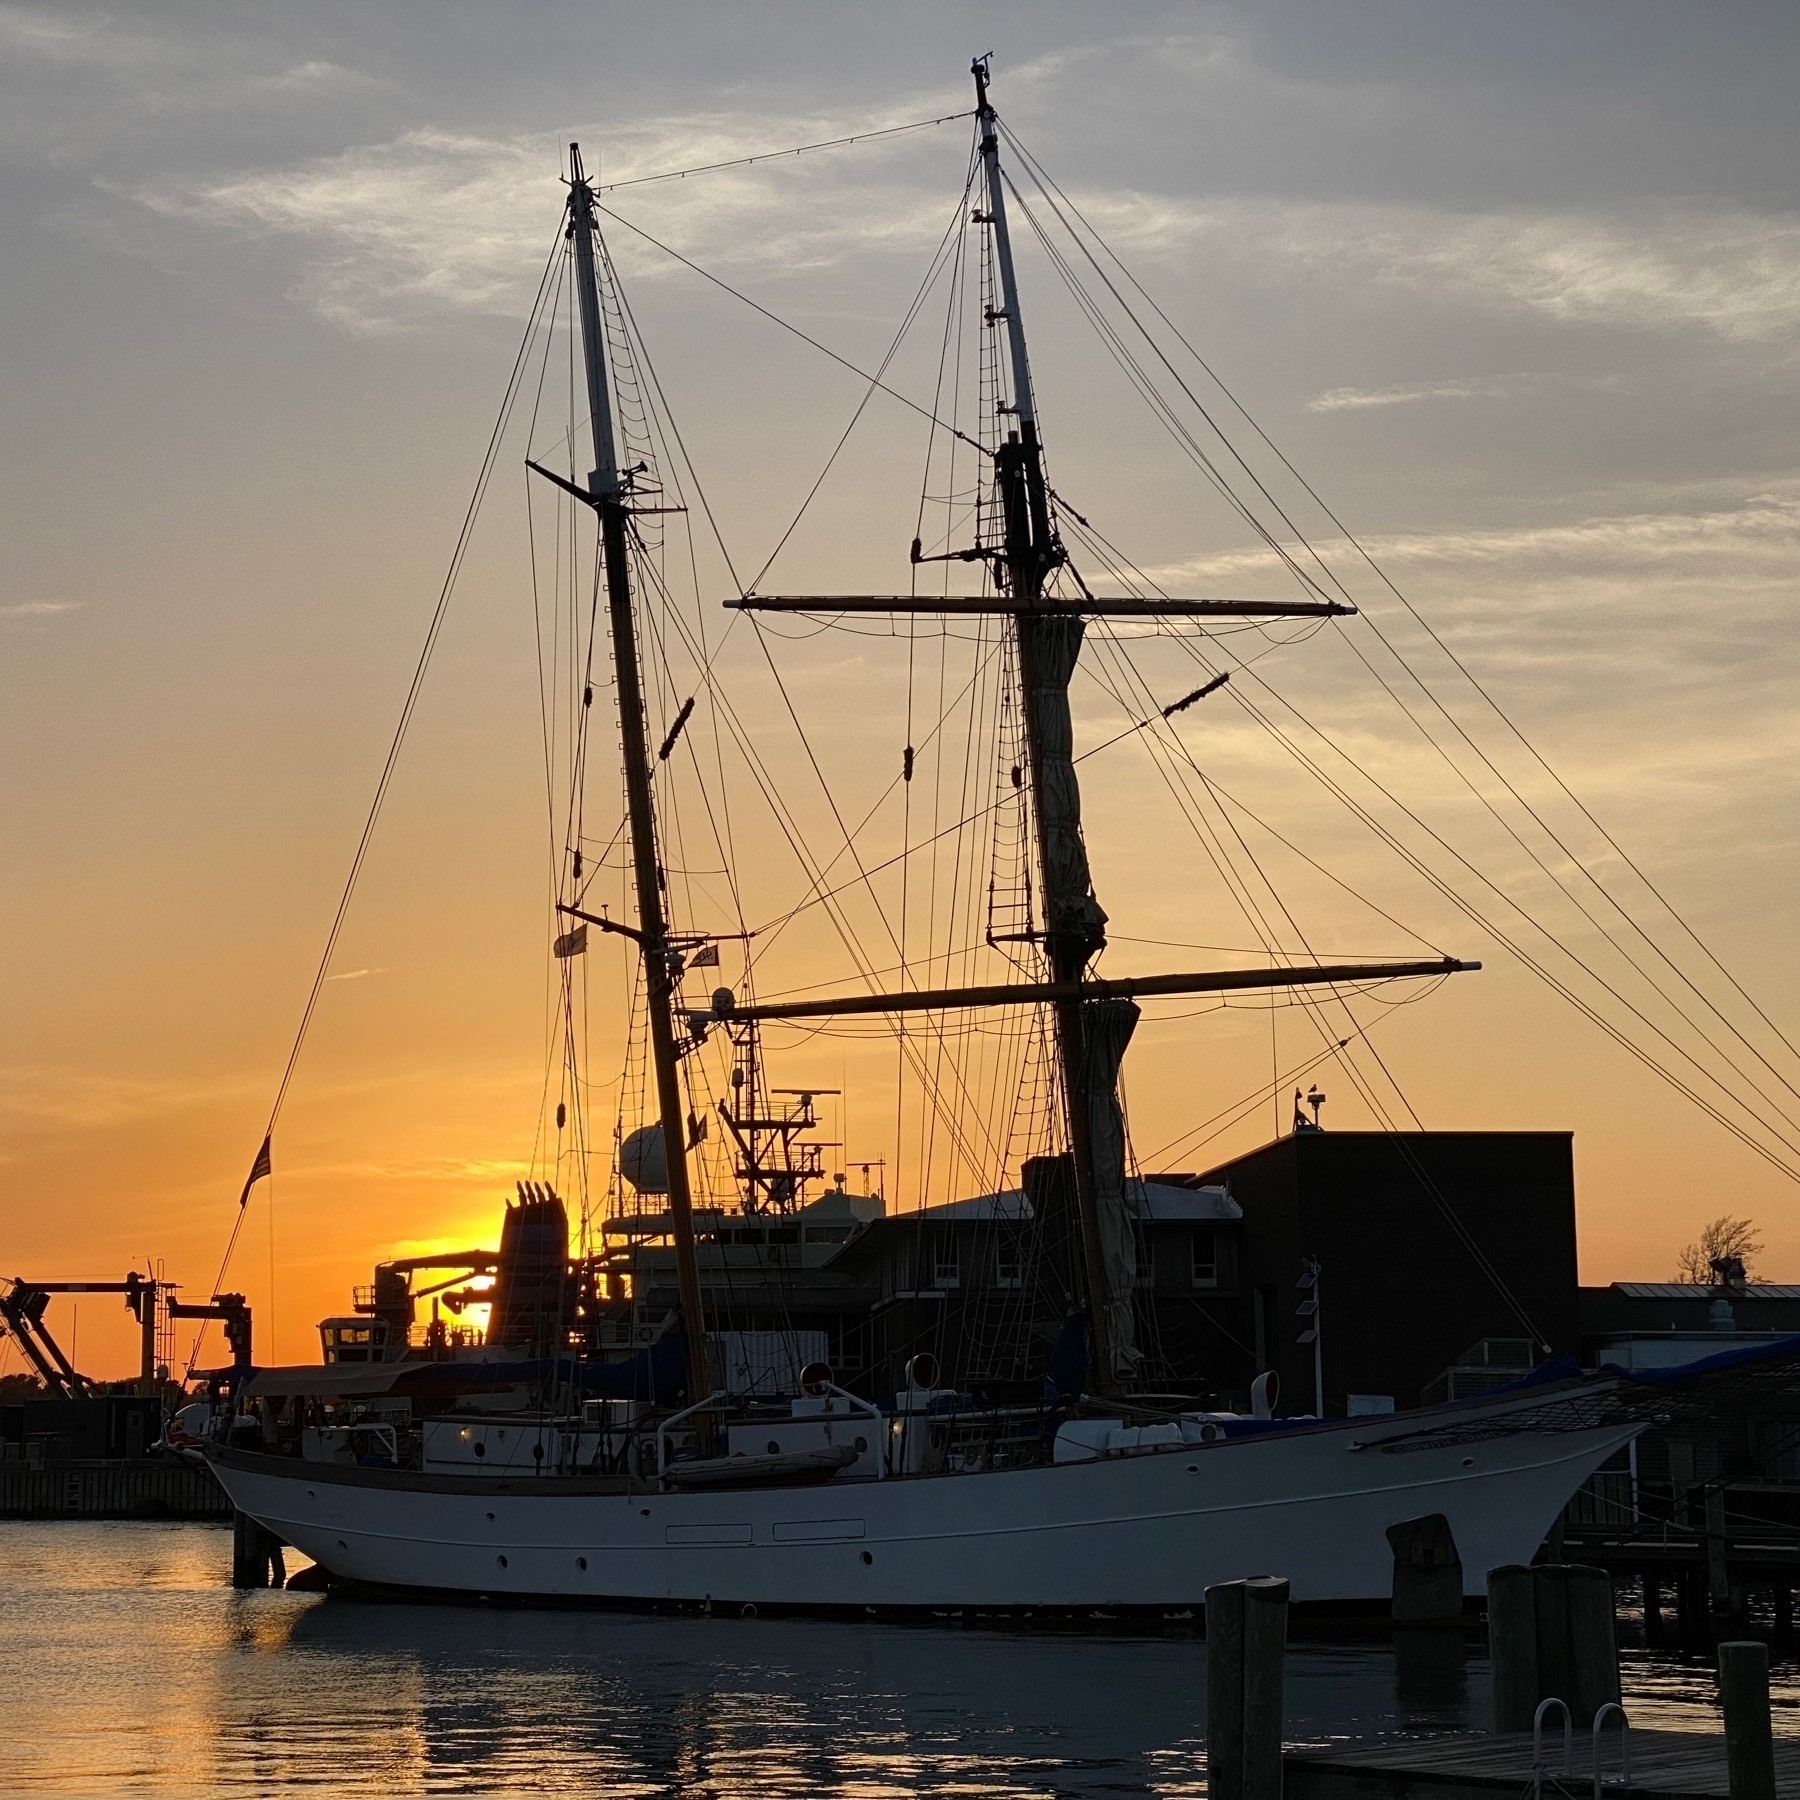 View at sunset of a harbor with a masted ship silhouetted against the sky.